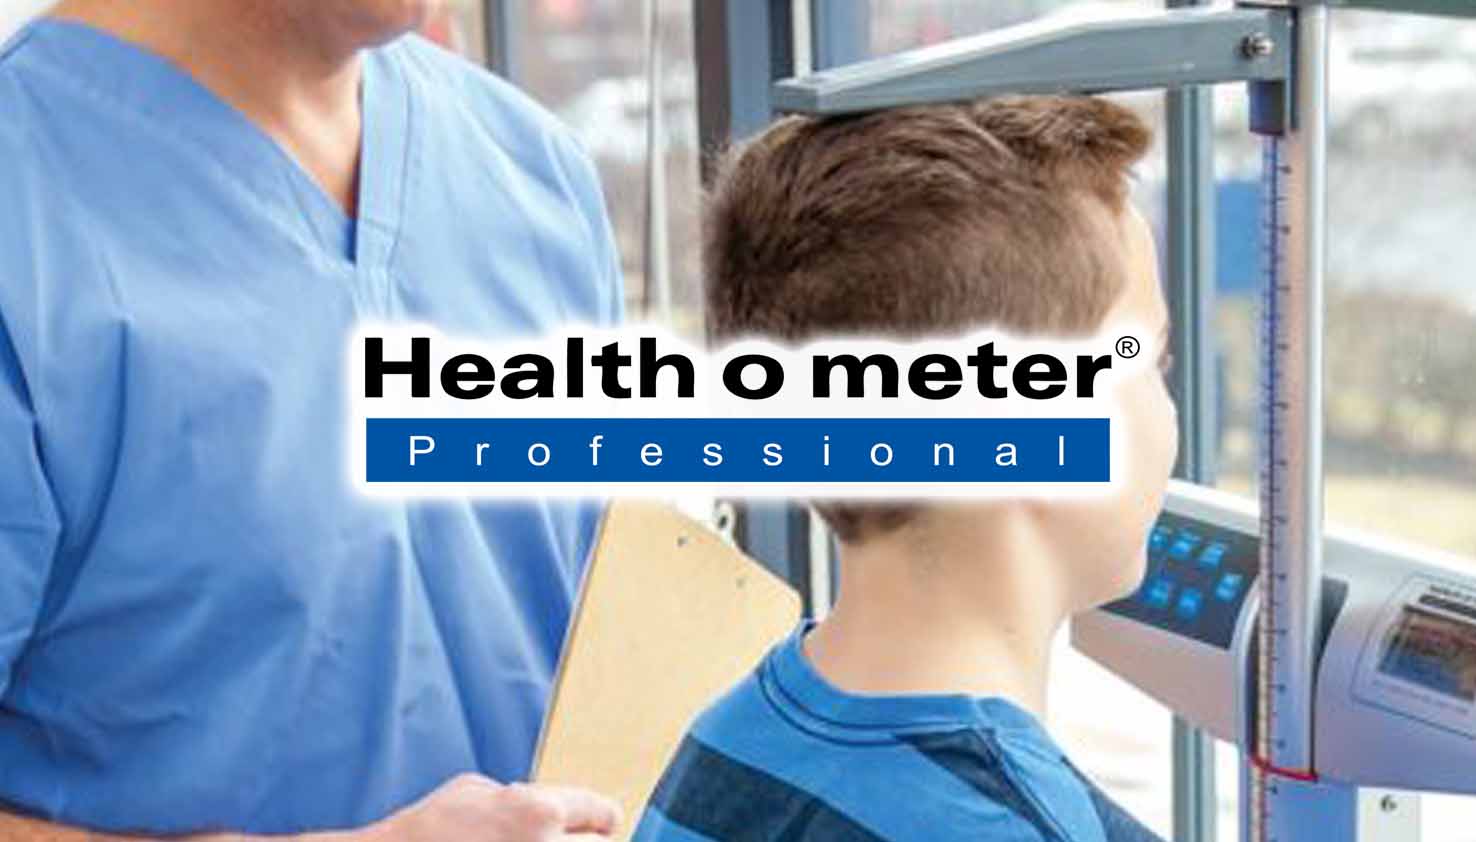 Health o meter (#4225) - MAGNET GROUP GPO Medical Contracts